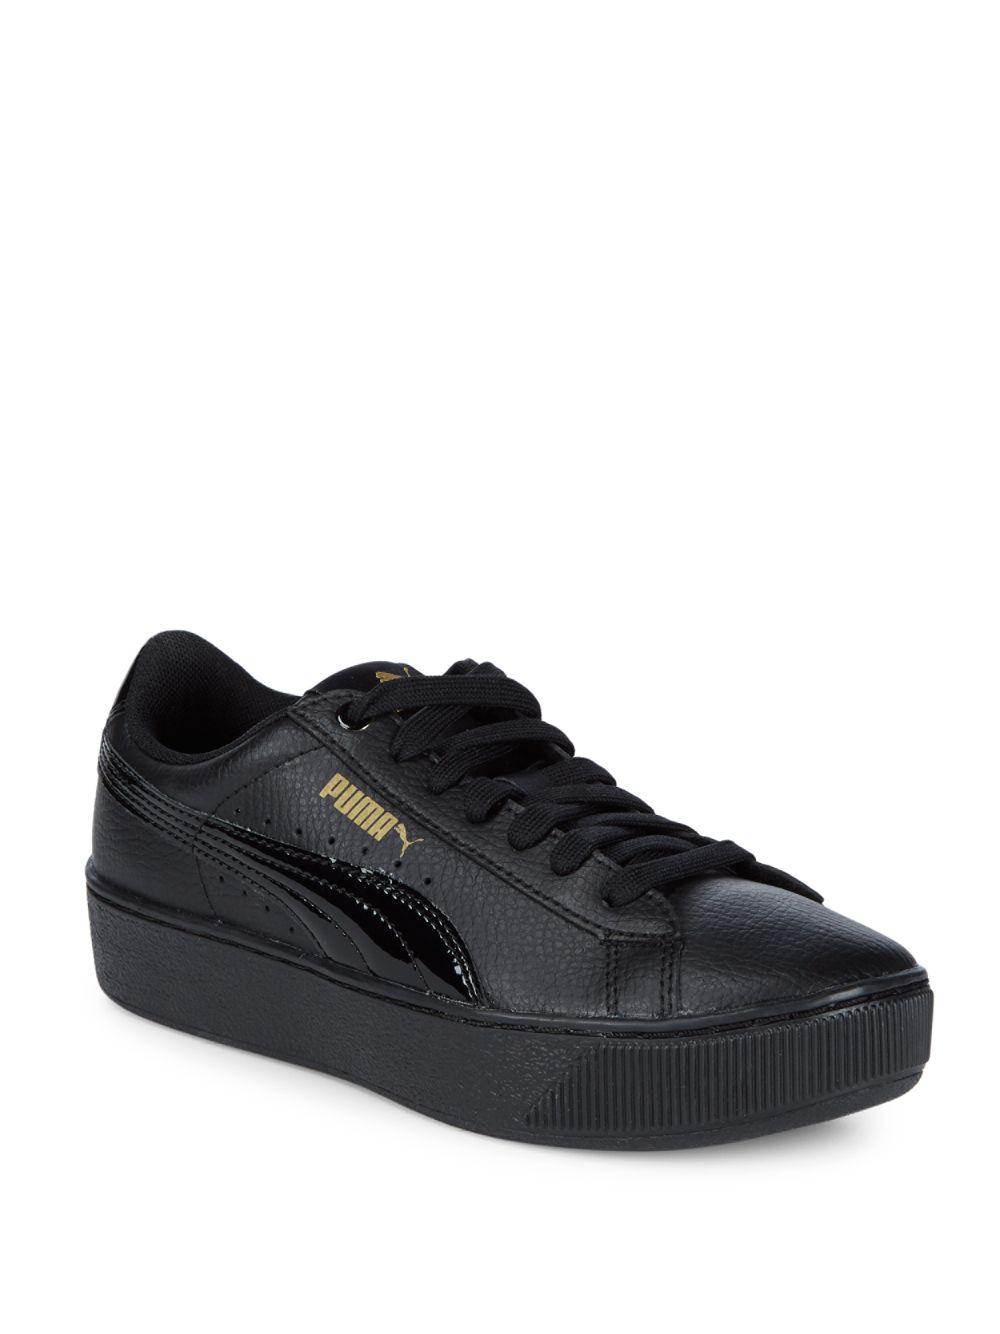 PUMA Vikky Platform Leather Sneakers in 